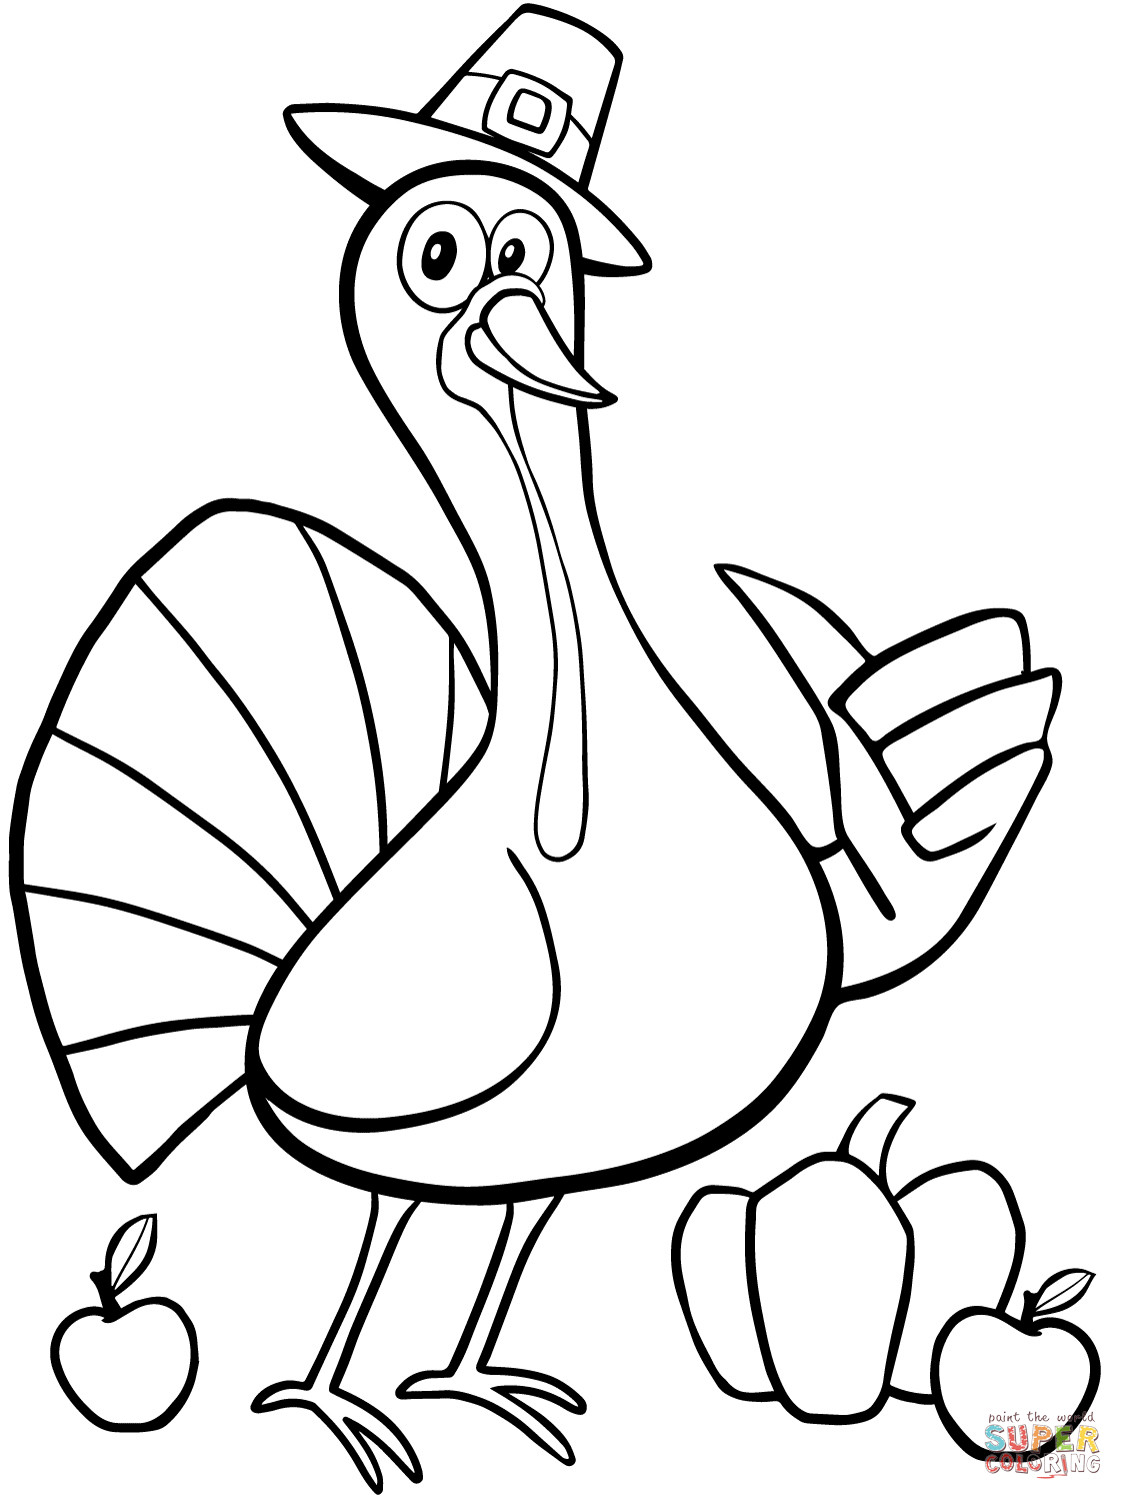 Printable Turkeys Coloring Pages
 Cool Thanksgiving Turkey coloring page